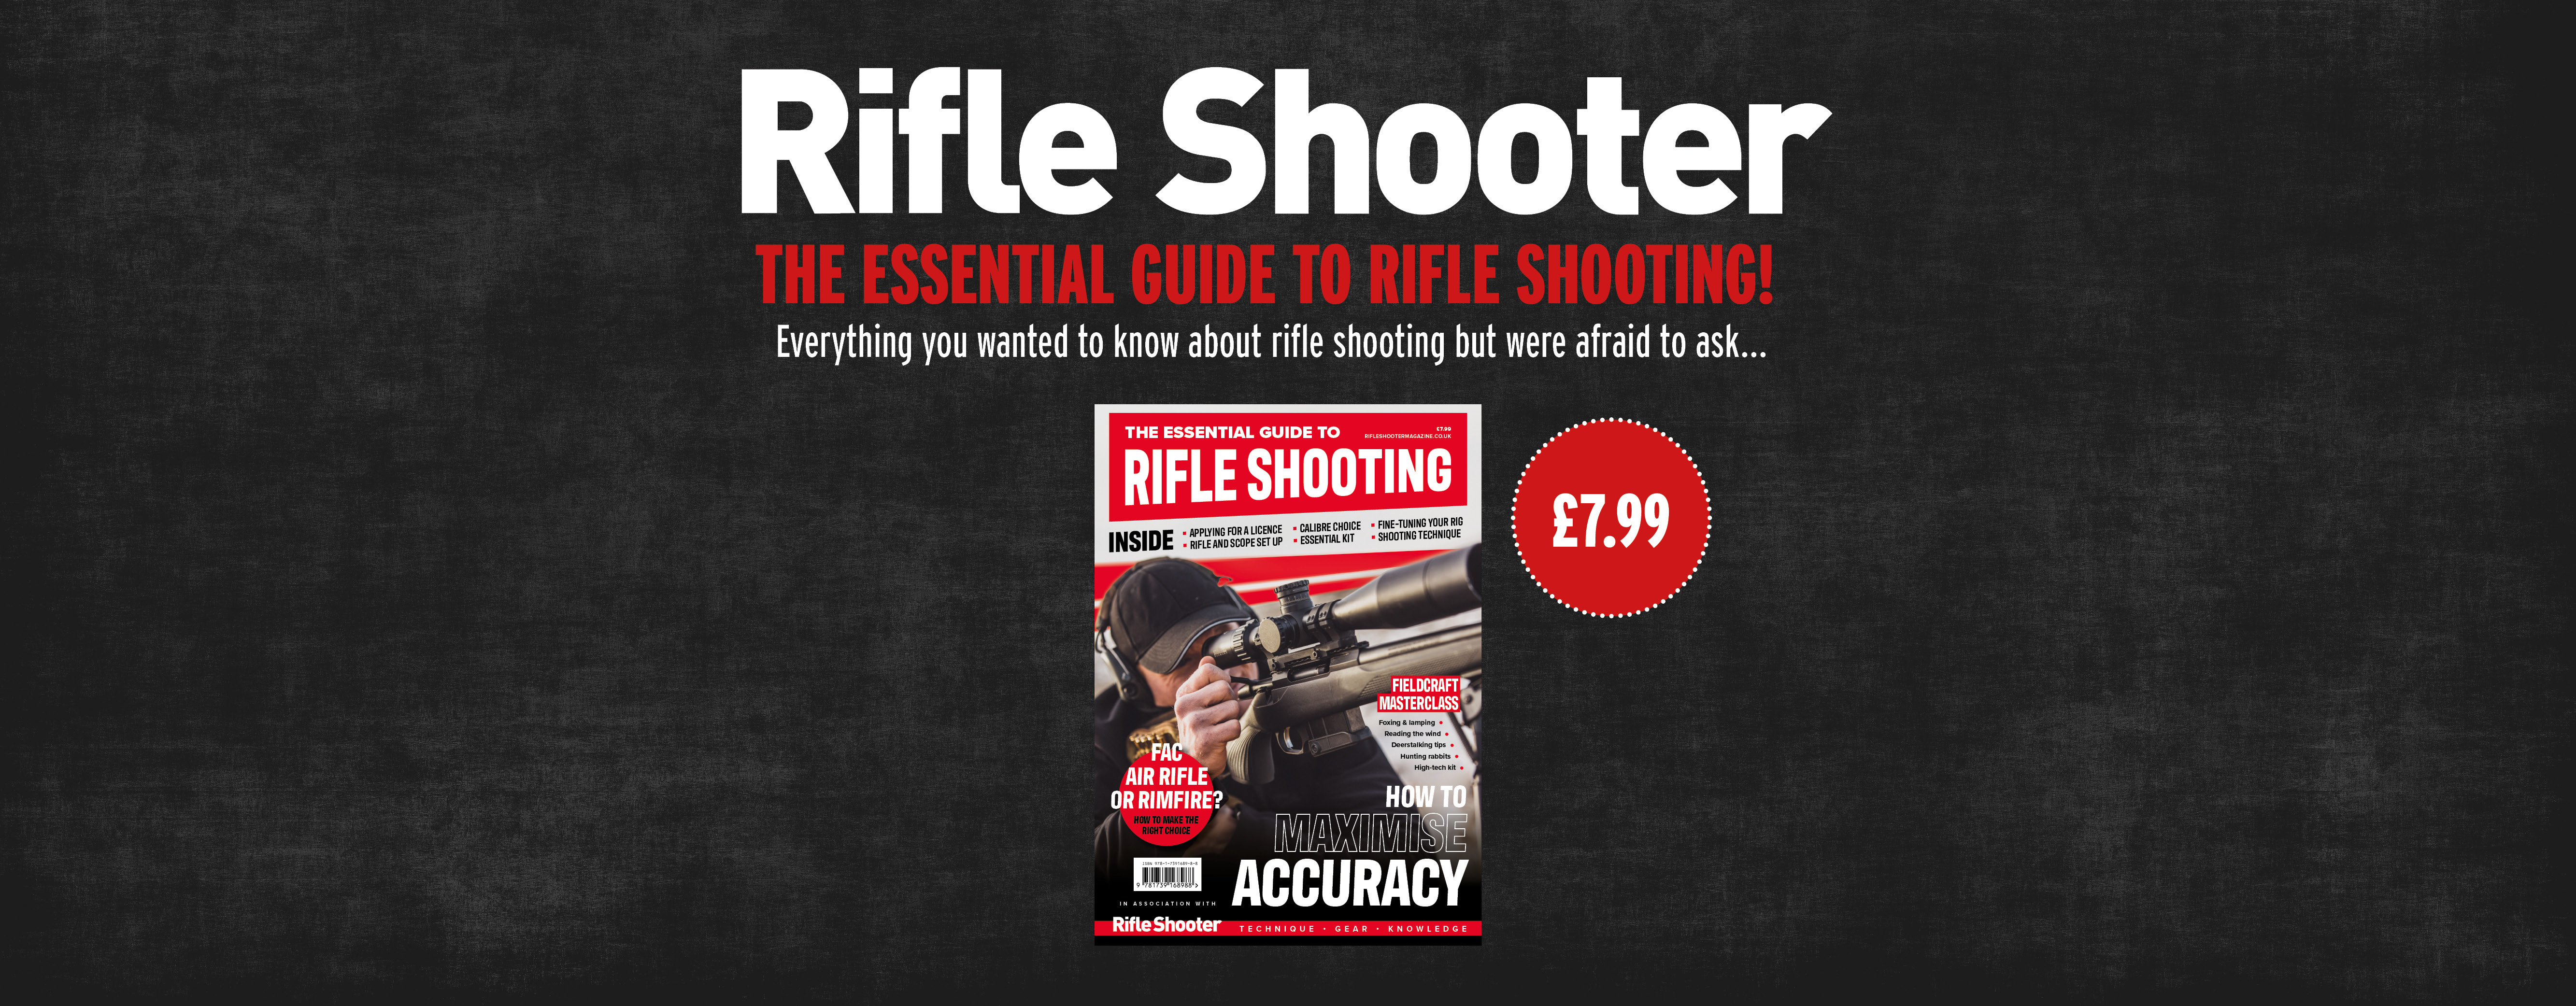 The Essential Guide to Rifle Shooting